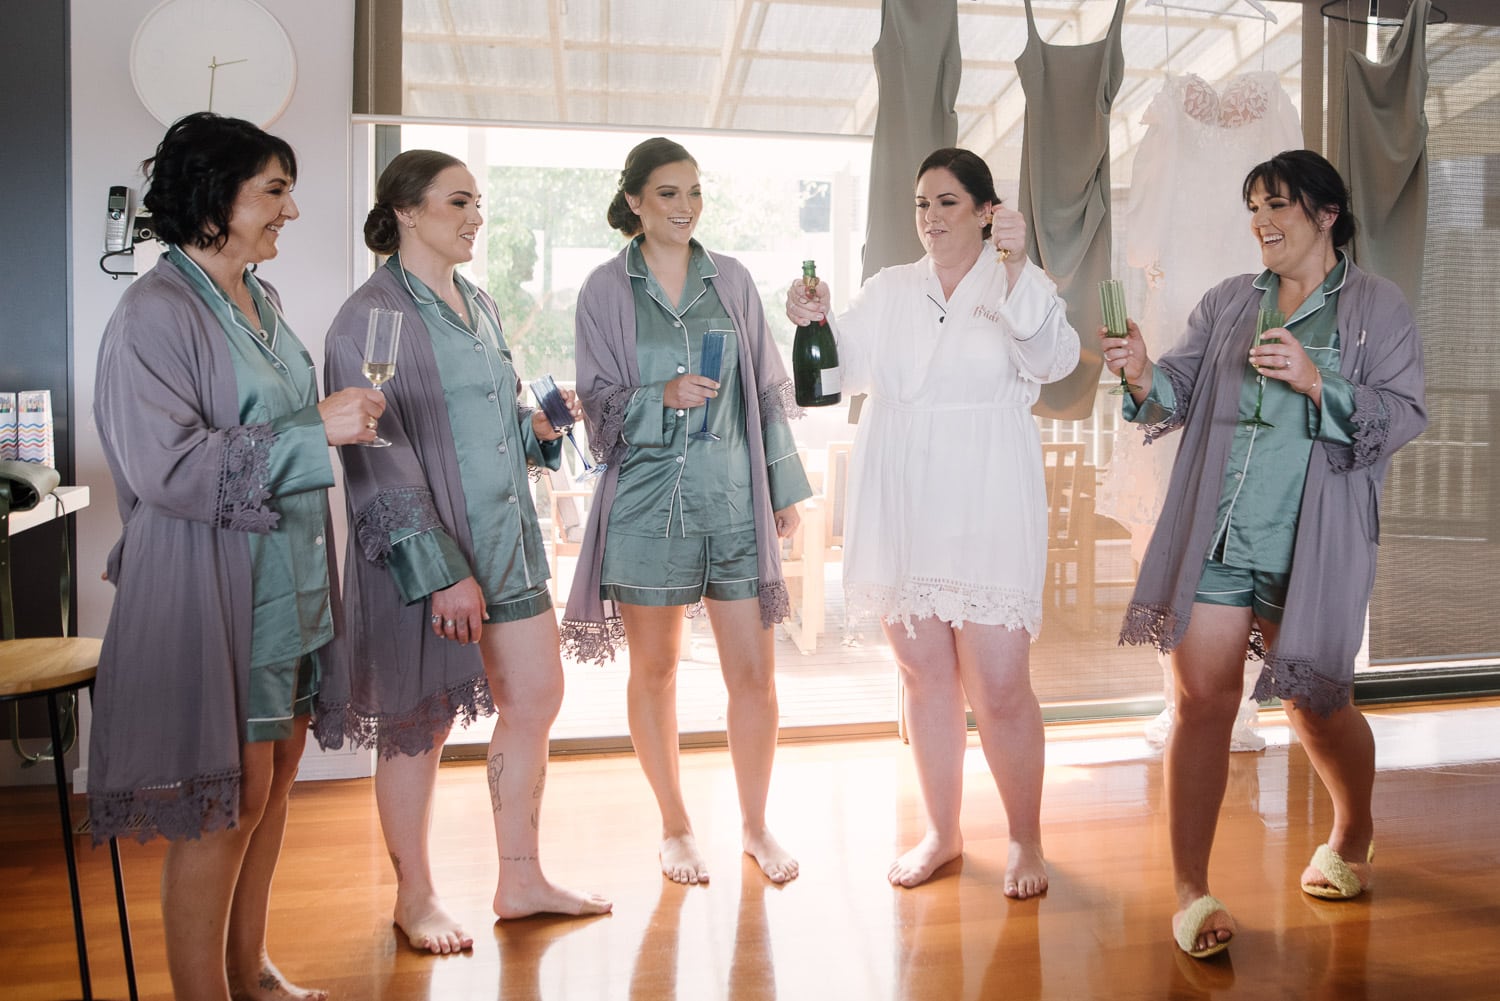 Bridesmaids drink champagne